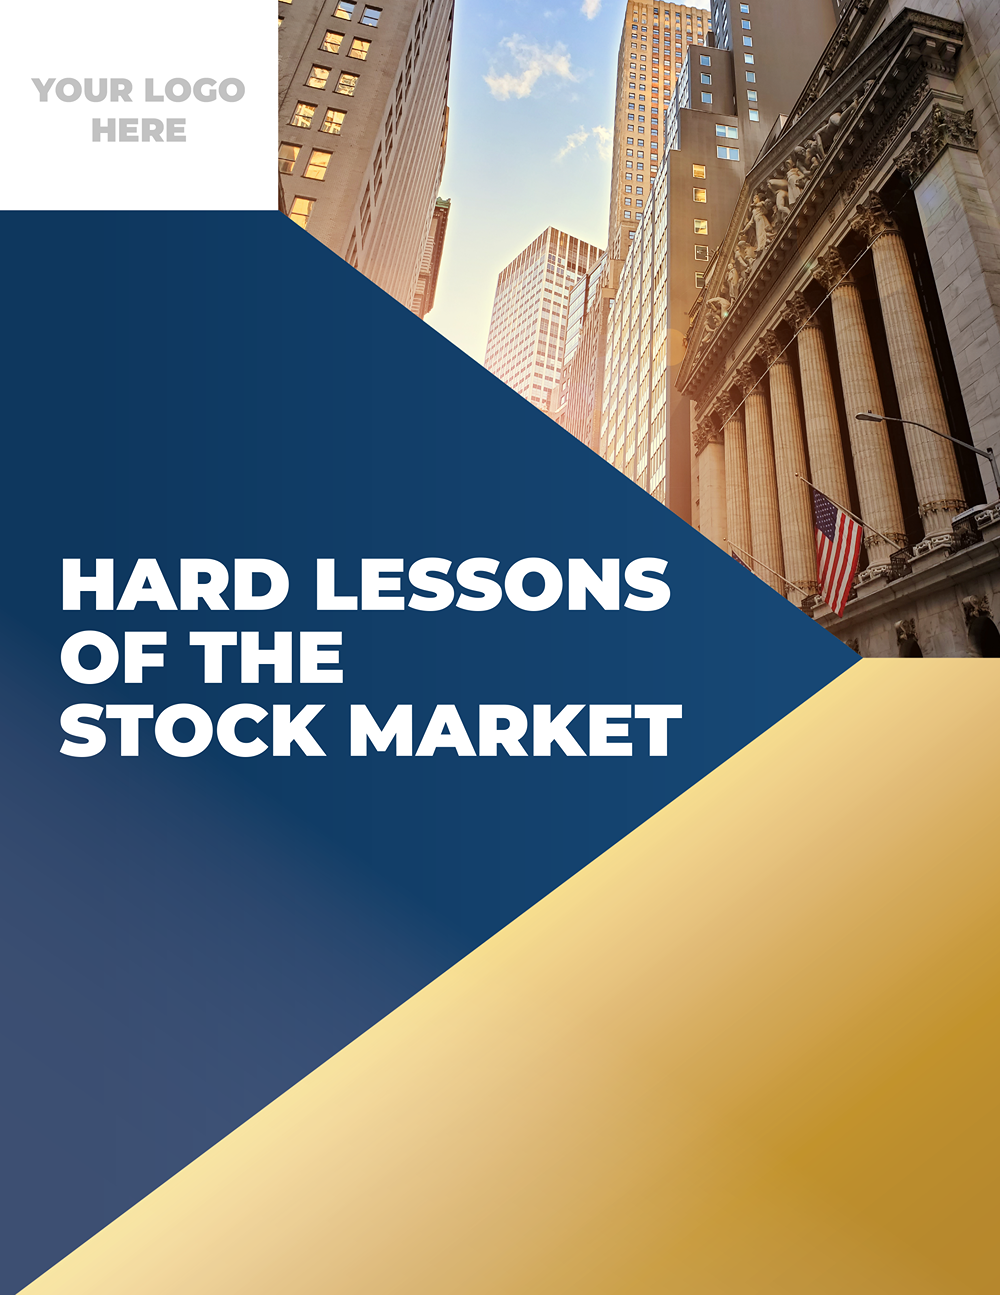 Hard Lessons of the Stock Market